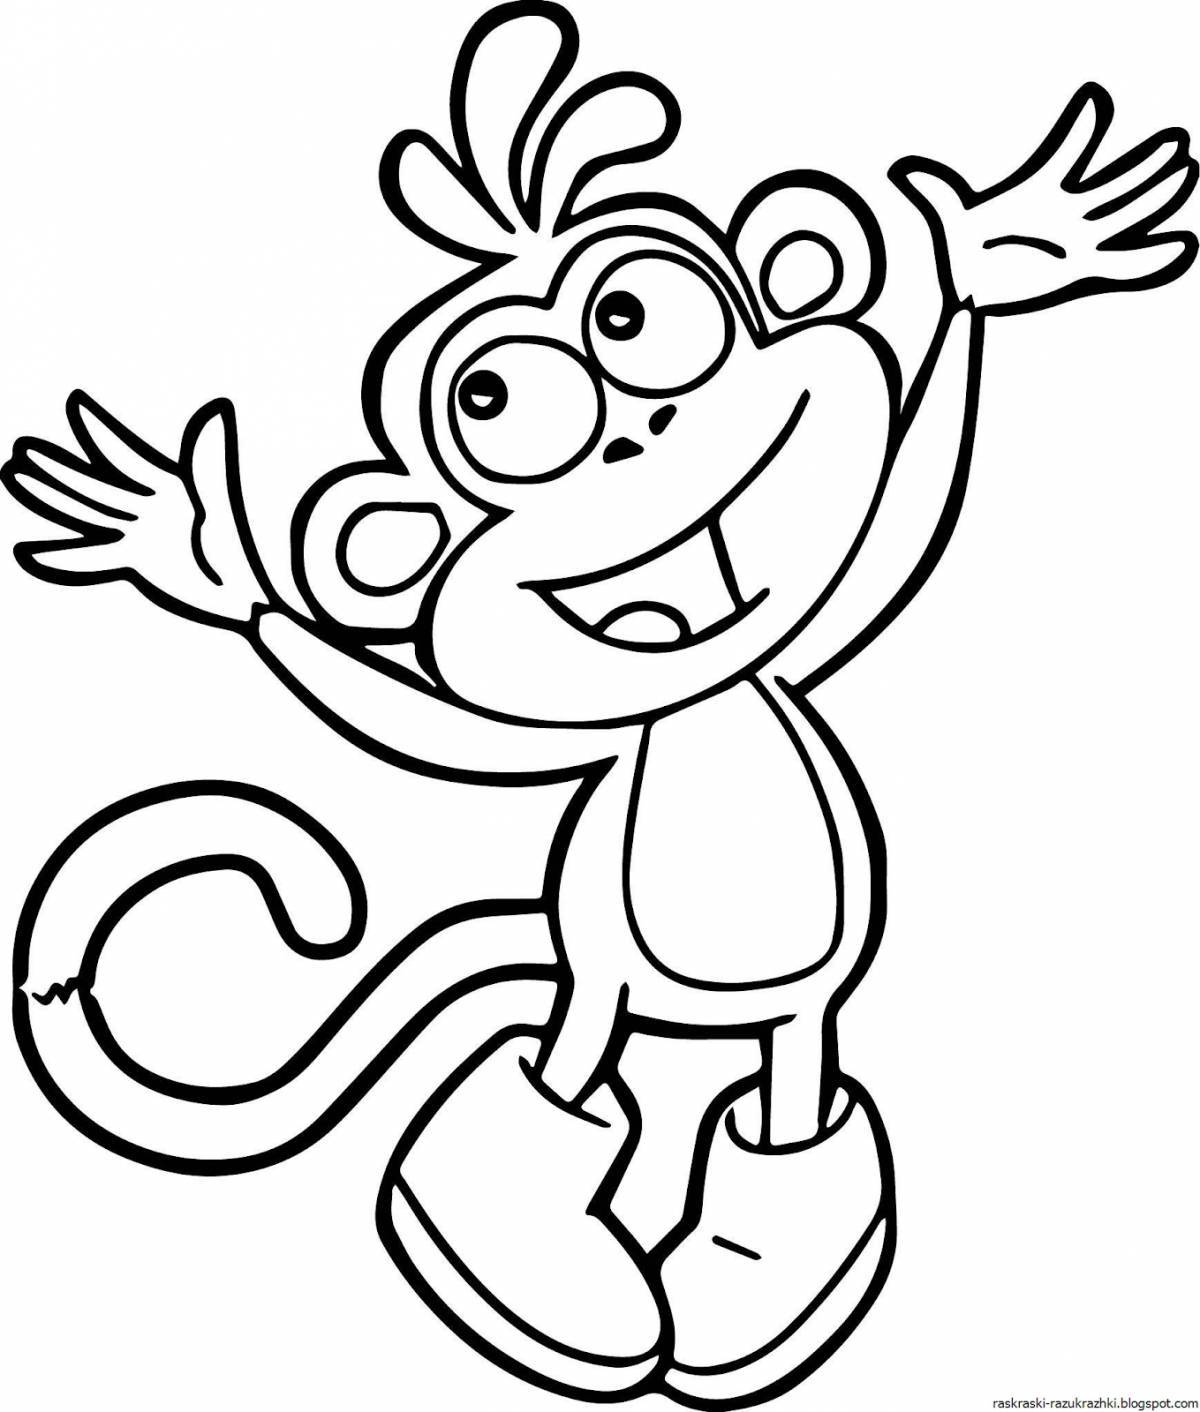 Naughty monkey coloring book